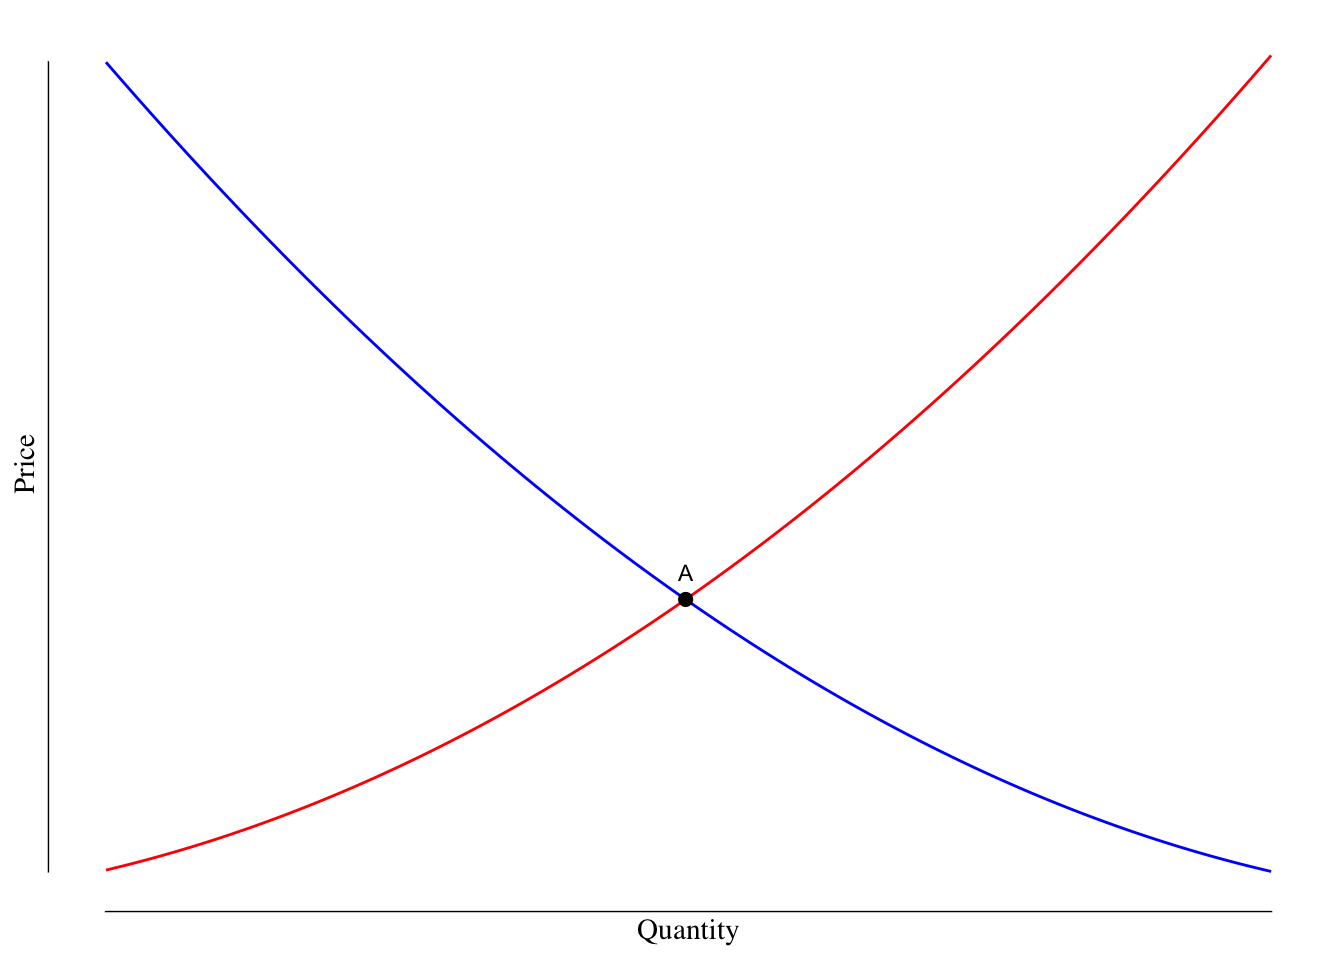 Supply and Demand Curves for Pizza. The red curve is the supply curve while the blue curve is the demand curve. The point highlighed and labeled as A is the competitivve equilibrium.